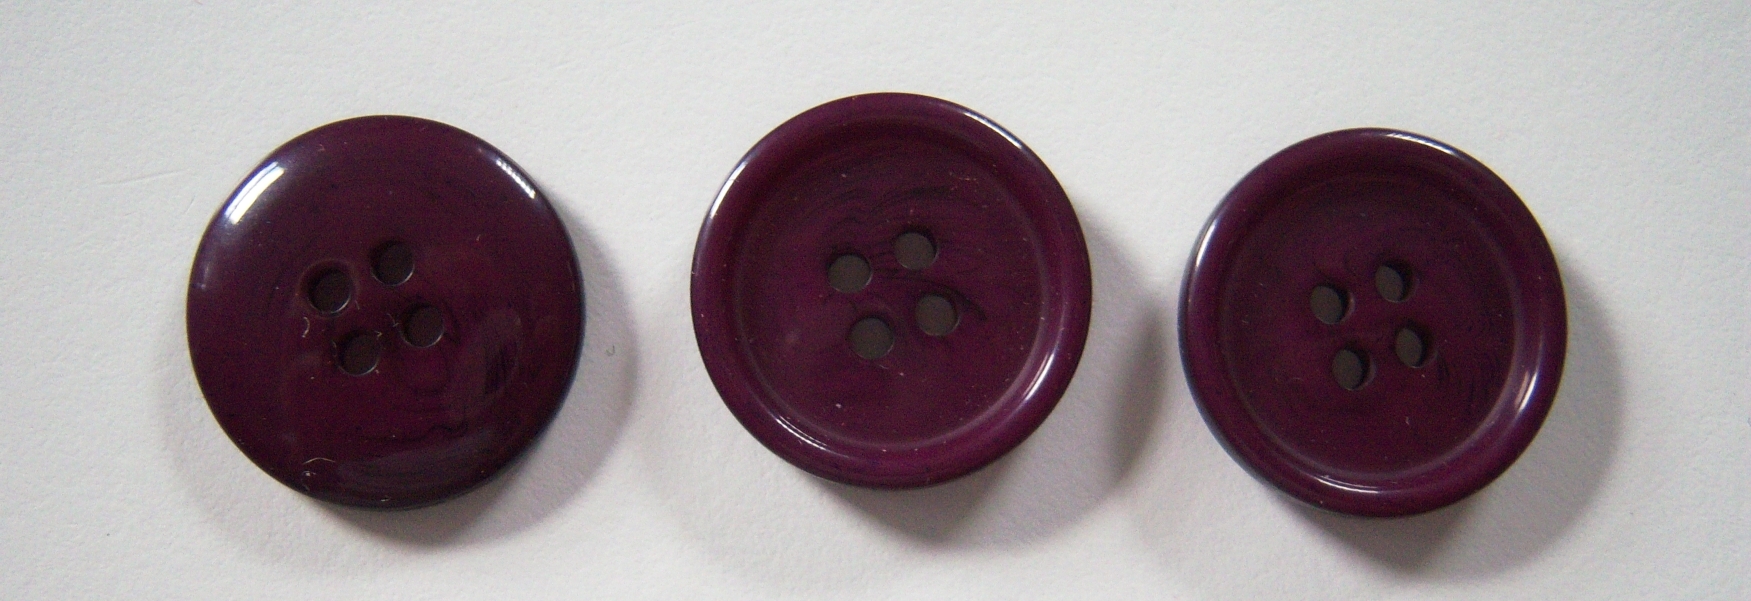 Byzantium Marbled 3/4" 4 Hole Poly Button